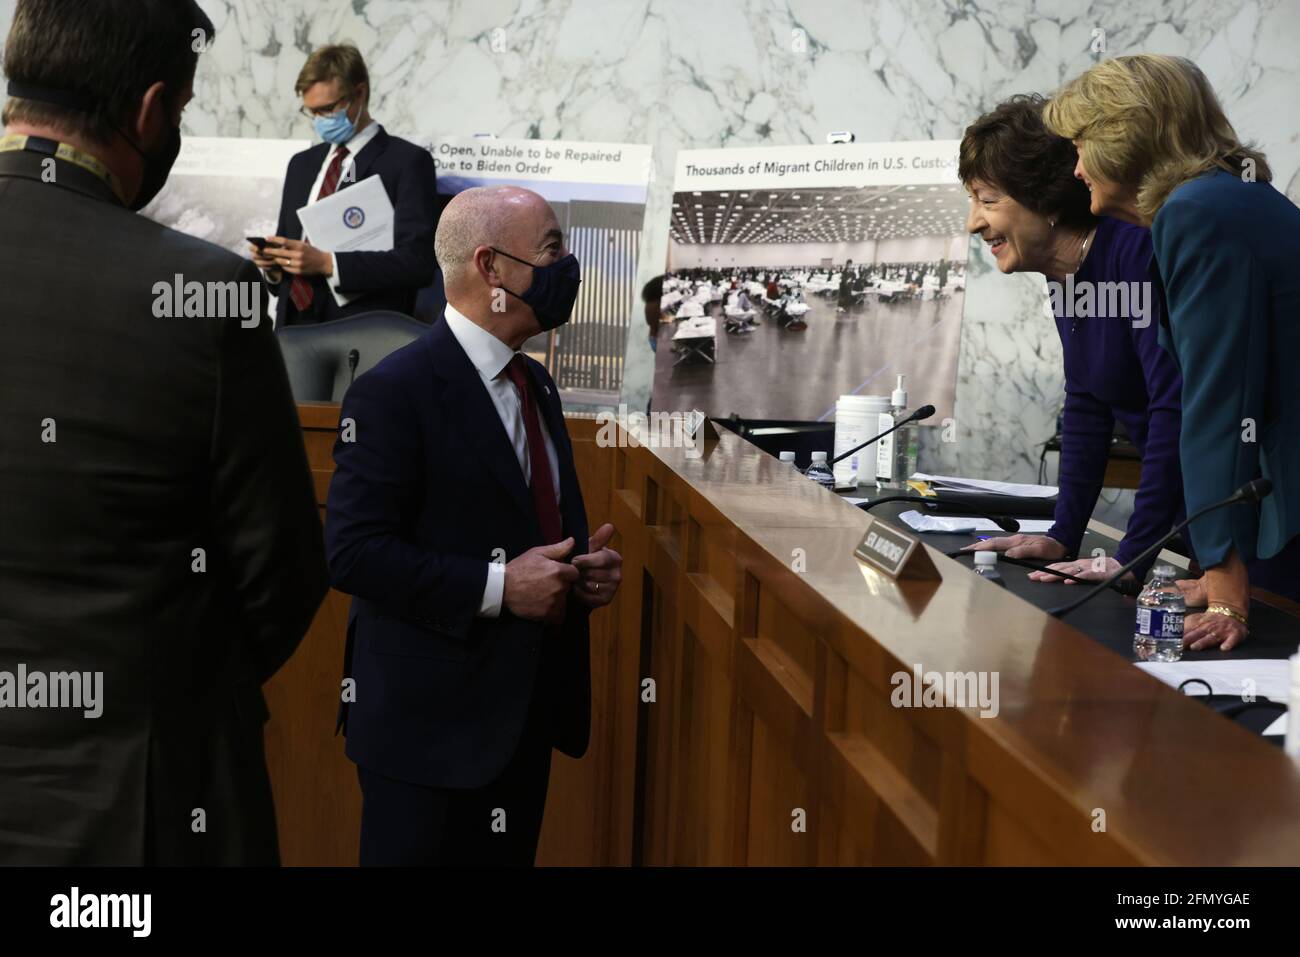 Washington, USA. 12th May, 2021. WASHINGTON, DC - MAY 12: U.S. Homeland Security Secretary Alejandro Mayorkas (3rd R) talks to Sen. Susan Collins (R=ME) (2nd R) and Sen. Lisa Murkowski (R-AK) (R) during a break of a hearing before the Senate Appropriations Committee at Hart Senate Office Building on May 12, 2021 on Capitol Hill in Washington, DC. The committee held a hearing on “Domestic Violent Extremism in America.” (Photo by Alex Wong/Pool/Sipa USA) Credit: Sipa USA/Alamy Live News Stock Photo